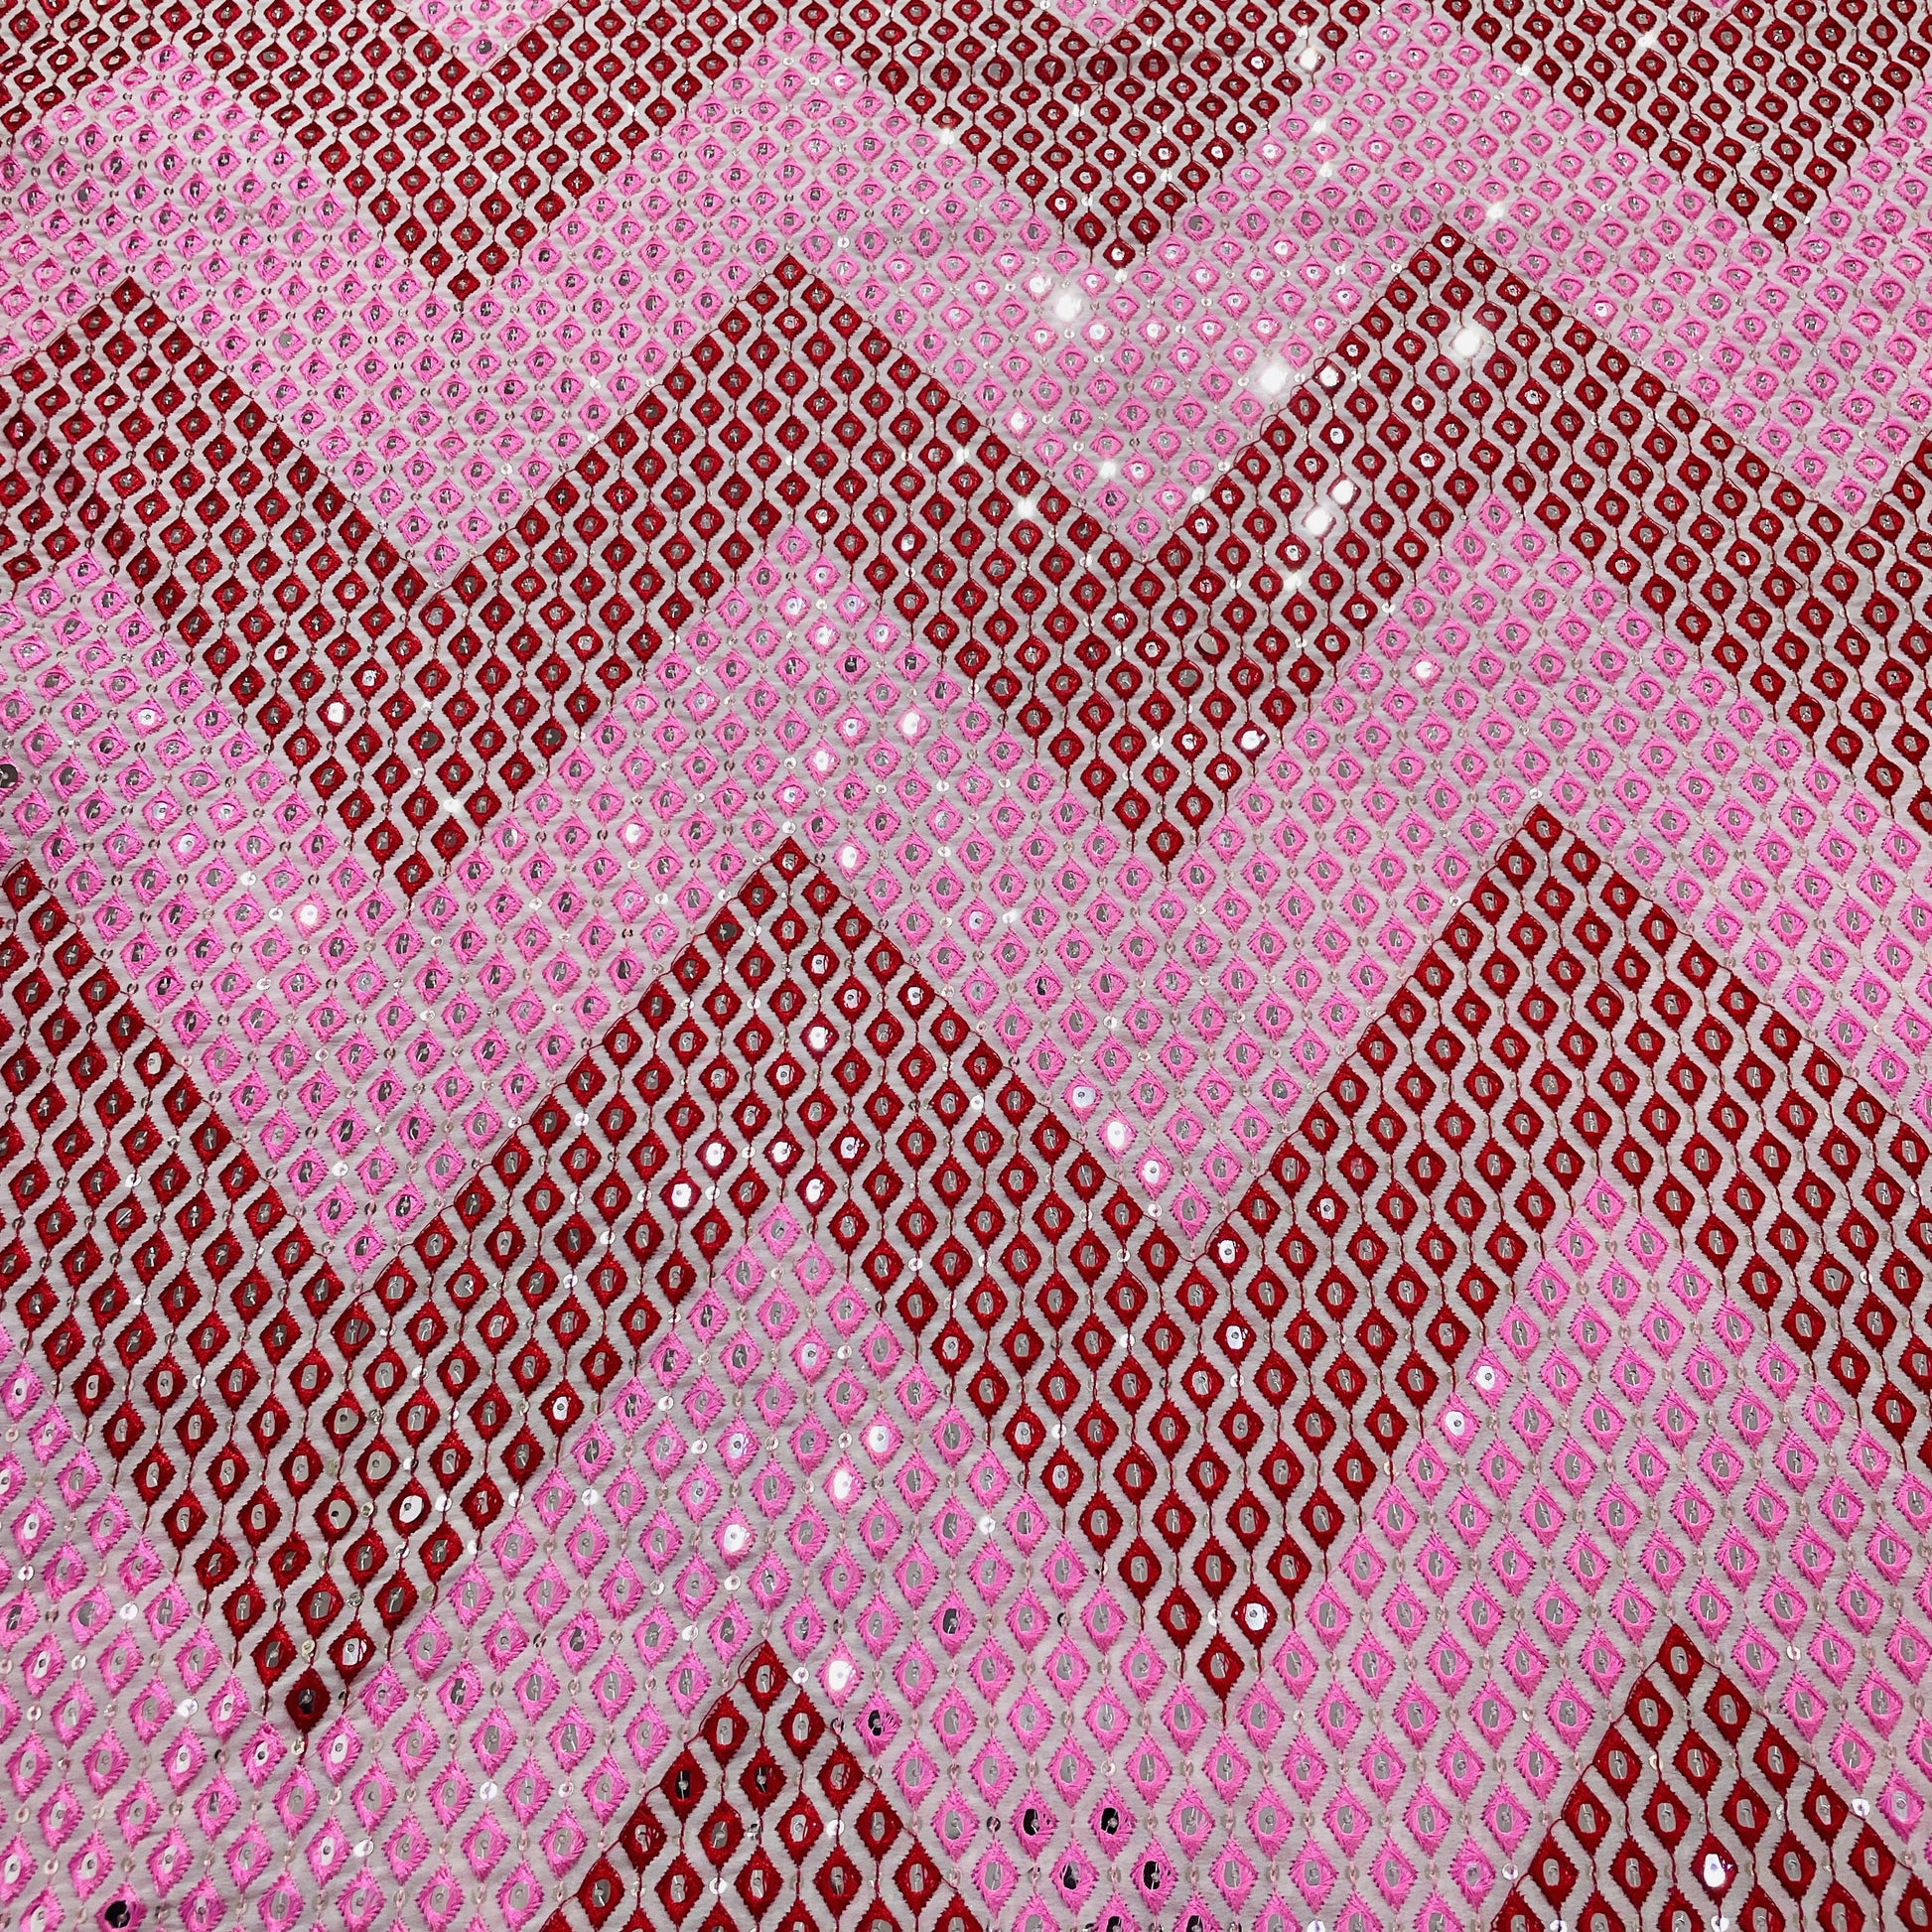 Pink & Red Chevron Mirror Embroidery Georgette Fabric 